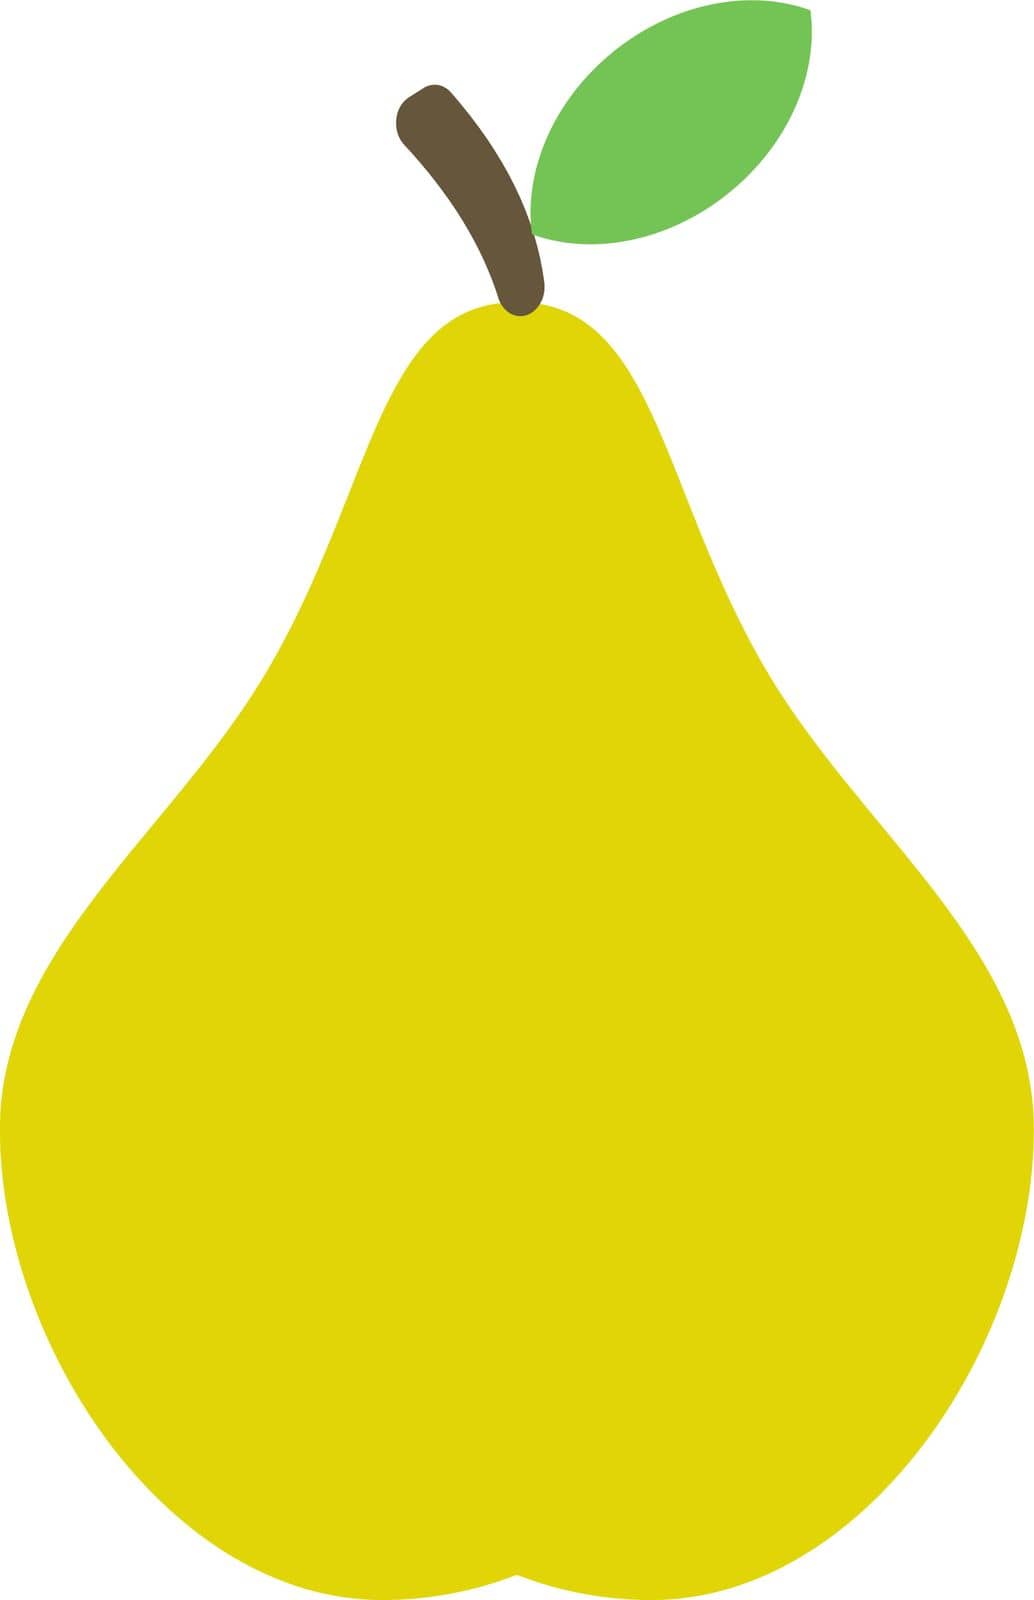 Pear, vector. Yellow pear icon on a white background.